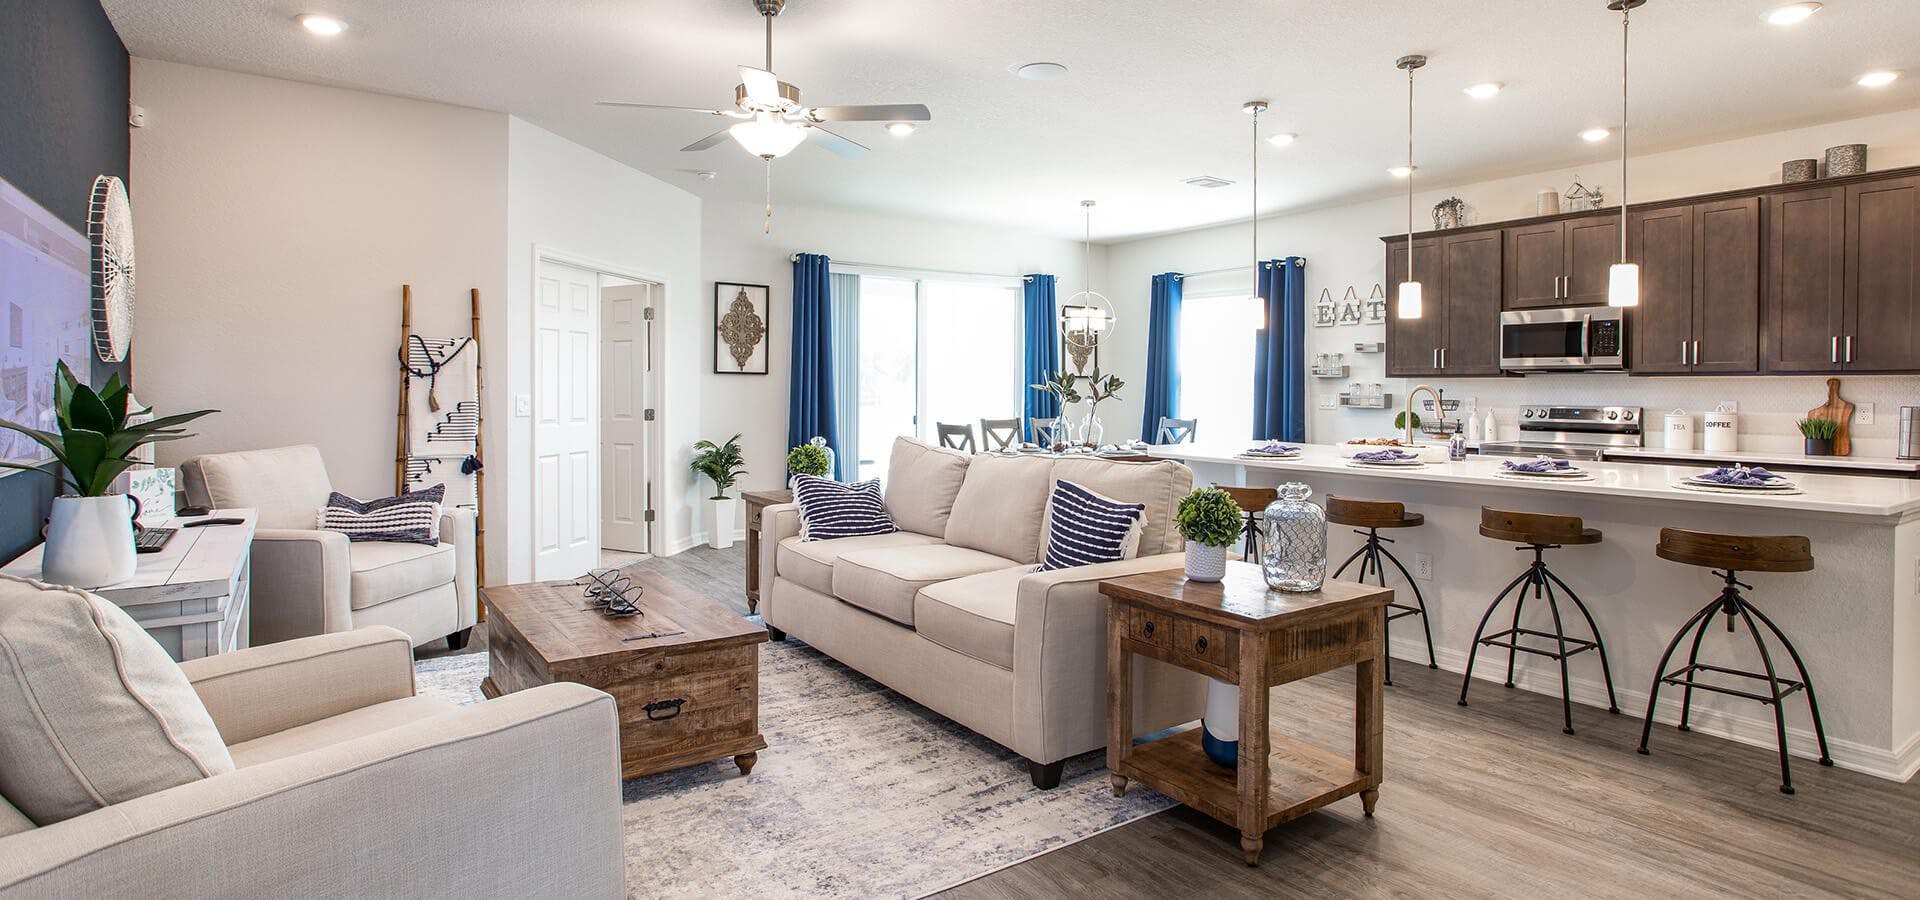 Open living area in a new home in Davenort, FL